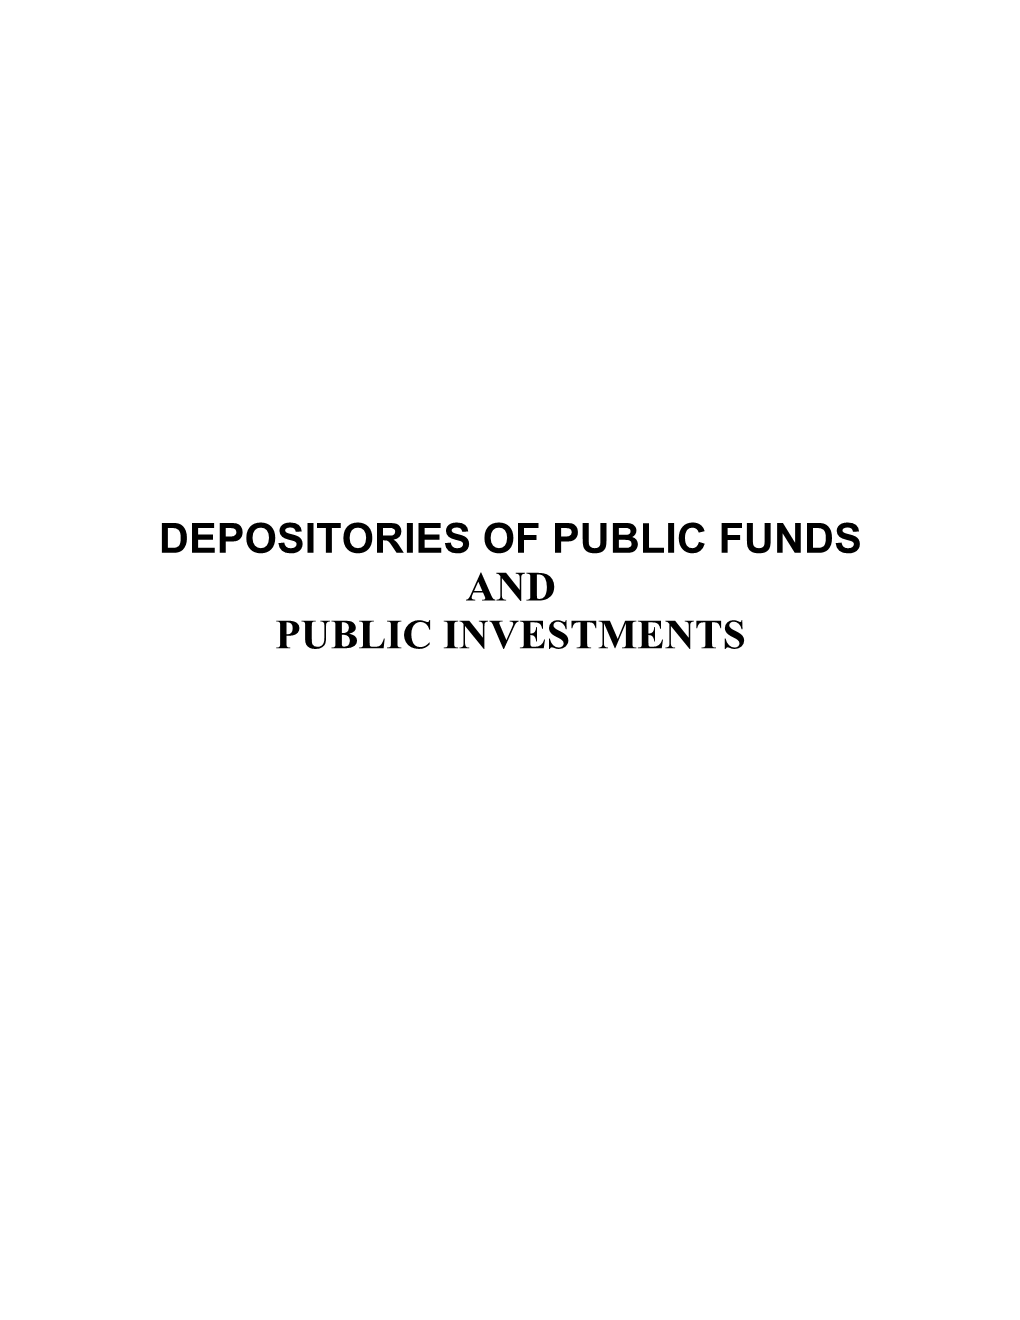 Depositories of Public Funds